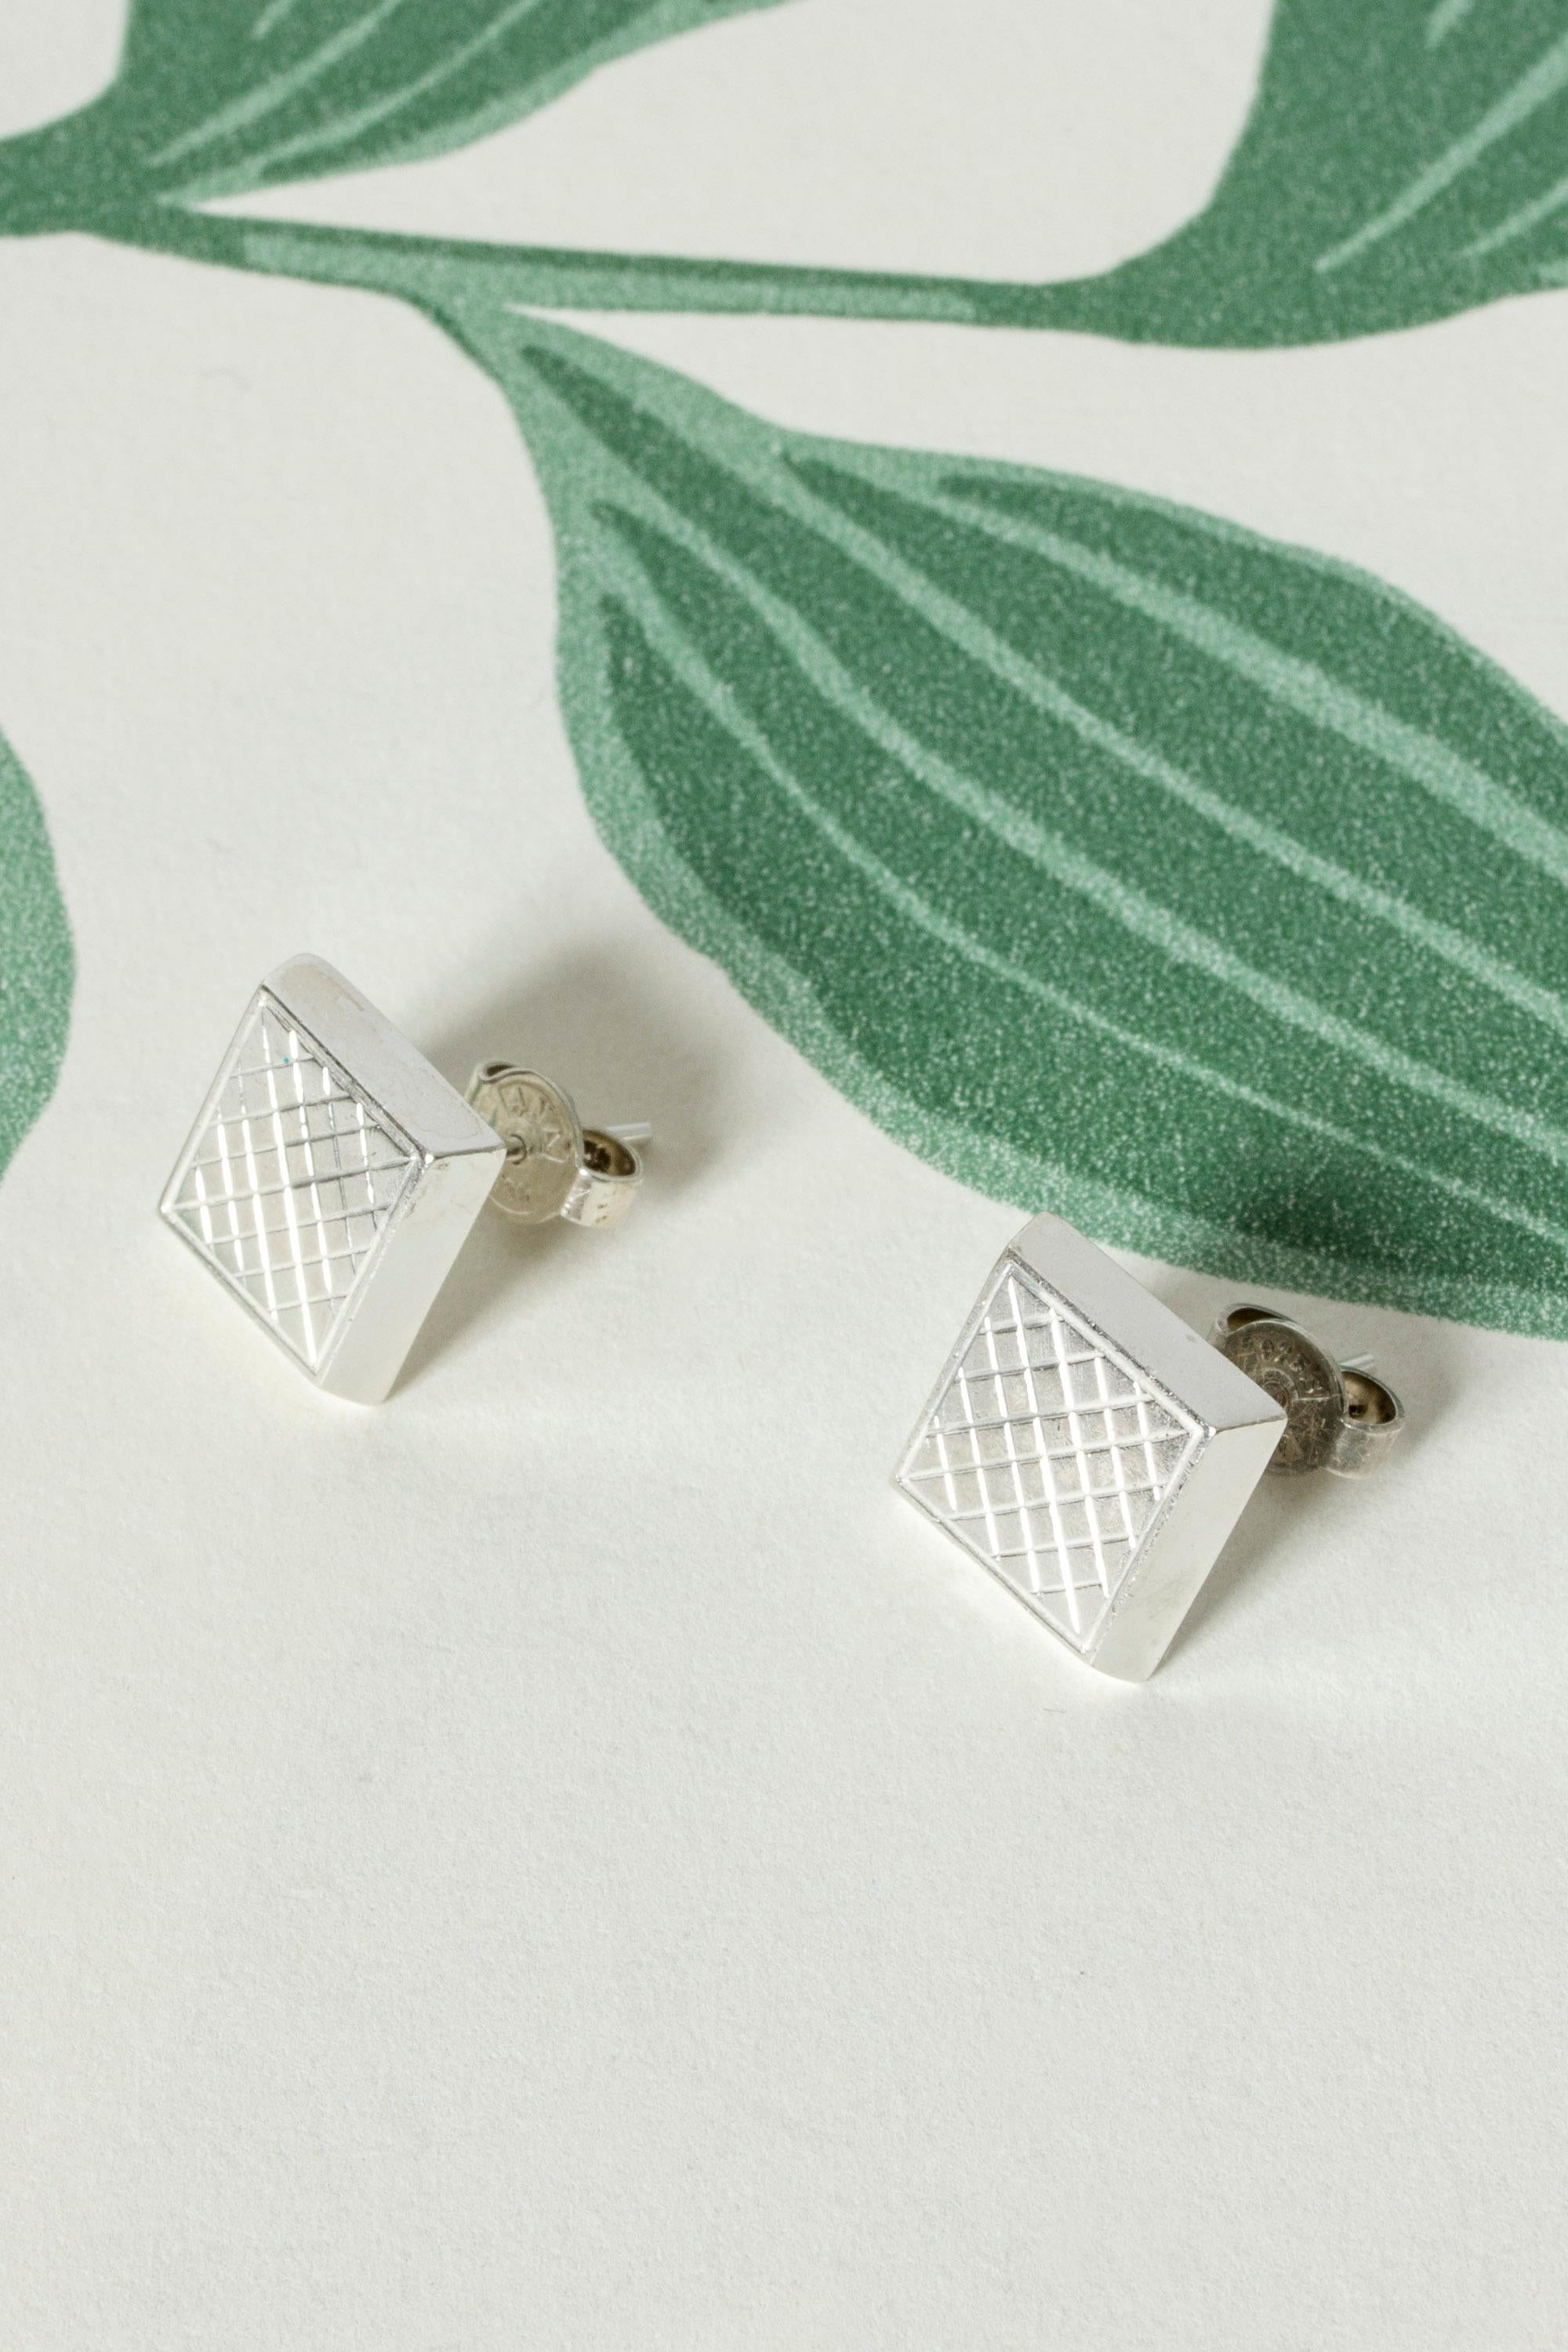 Pair of neat silver earrings from Atelier Borgila, in a square form with a checkered pattern. Discrete and elegant, for wearing every day.